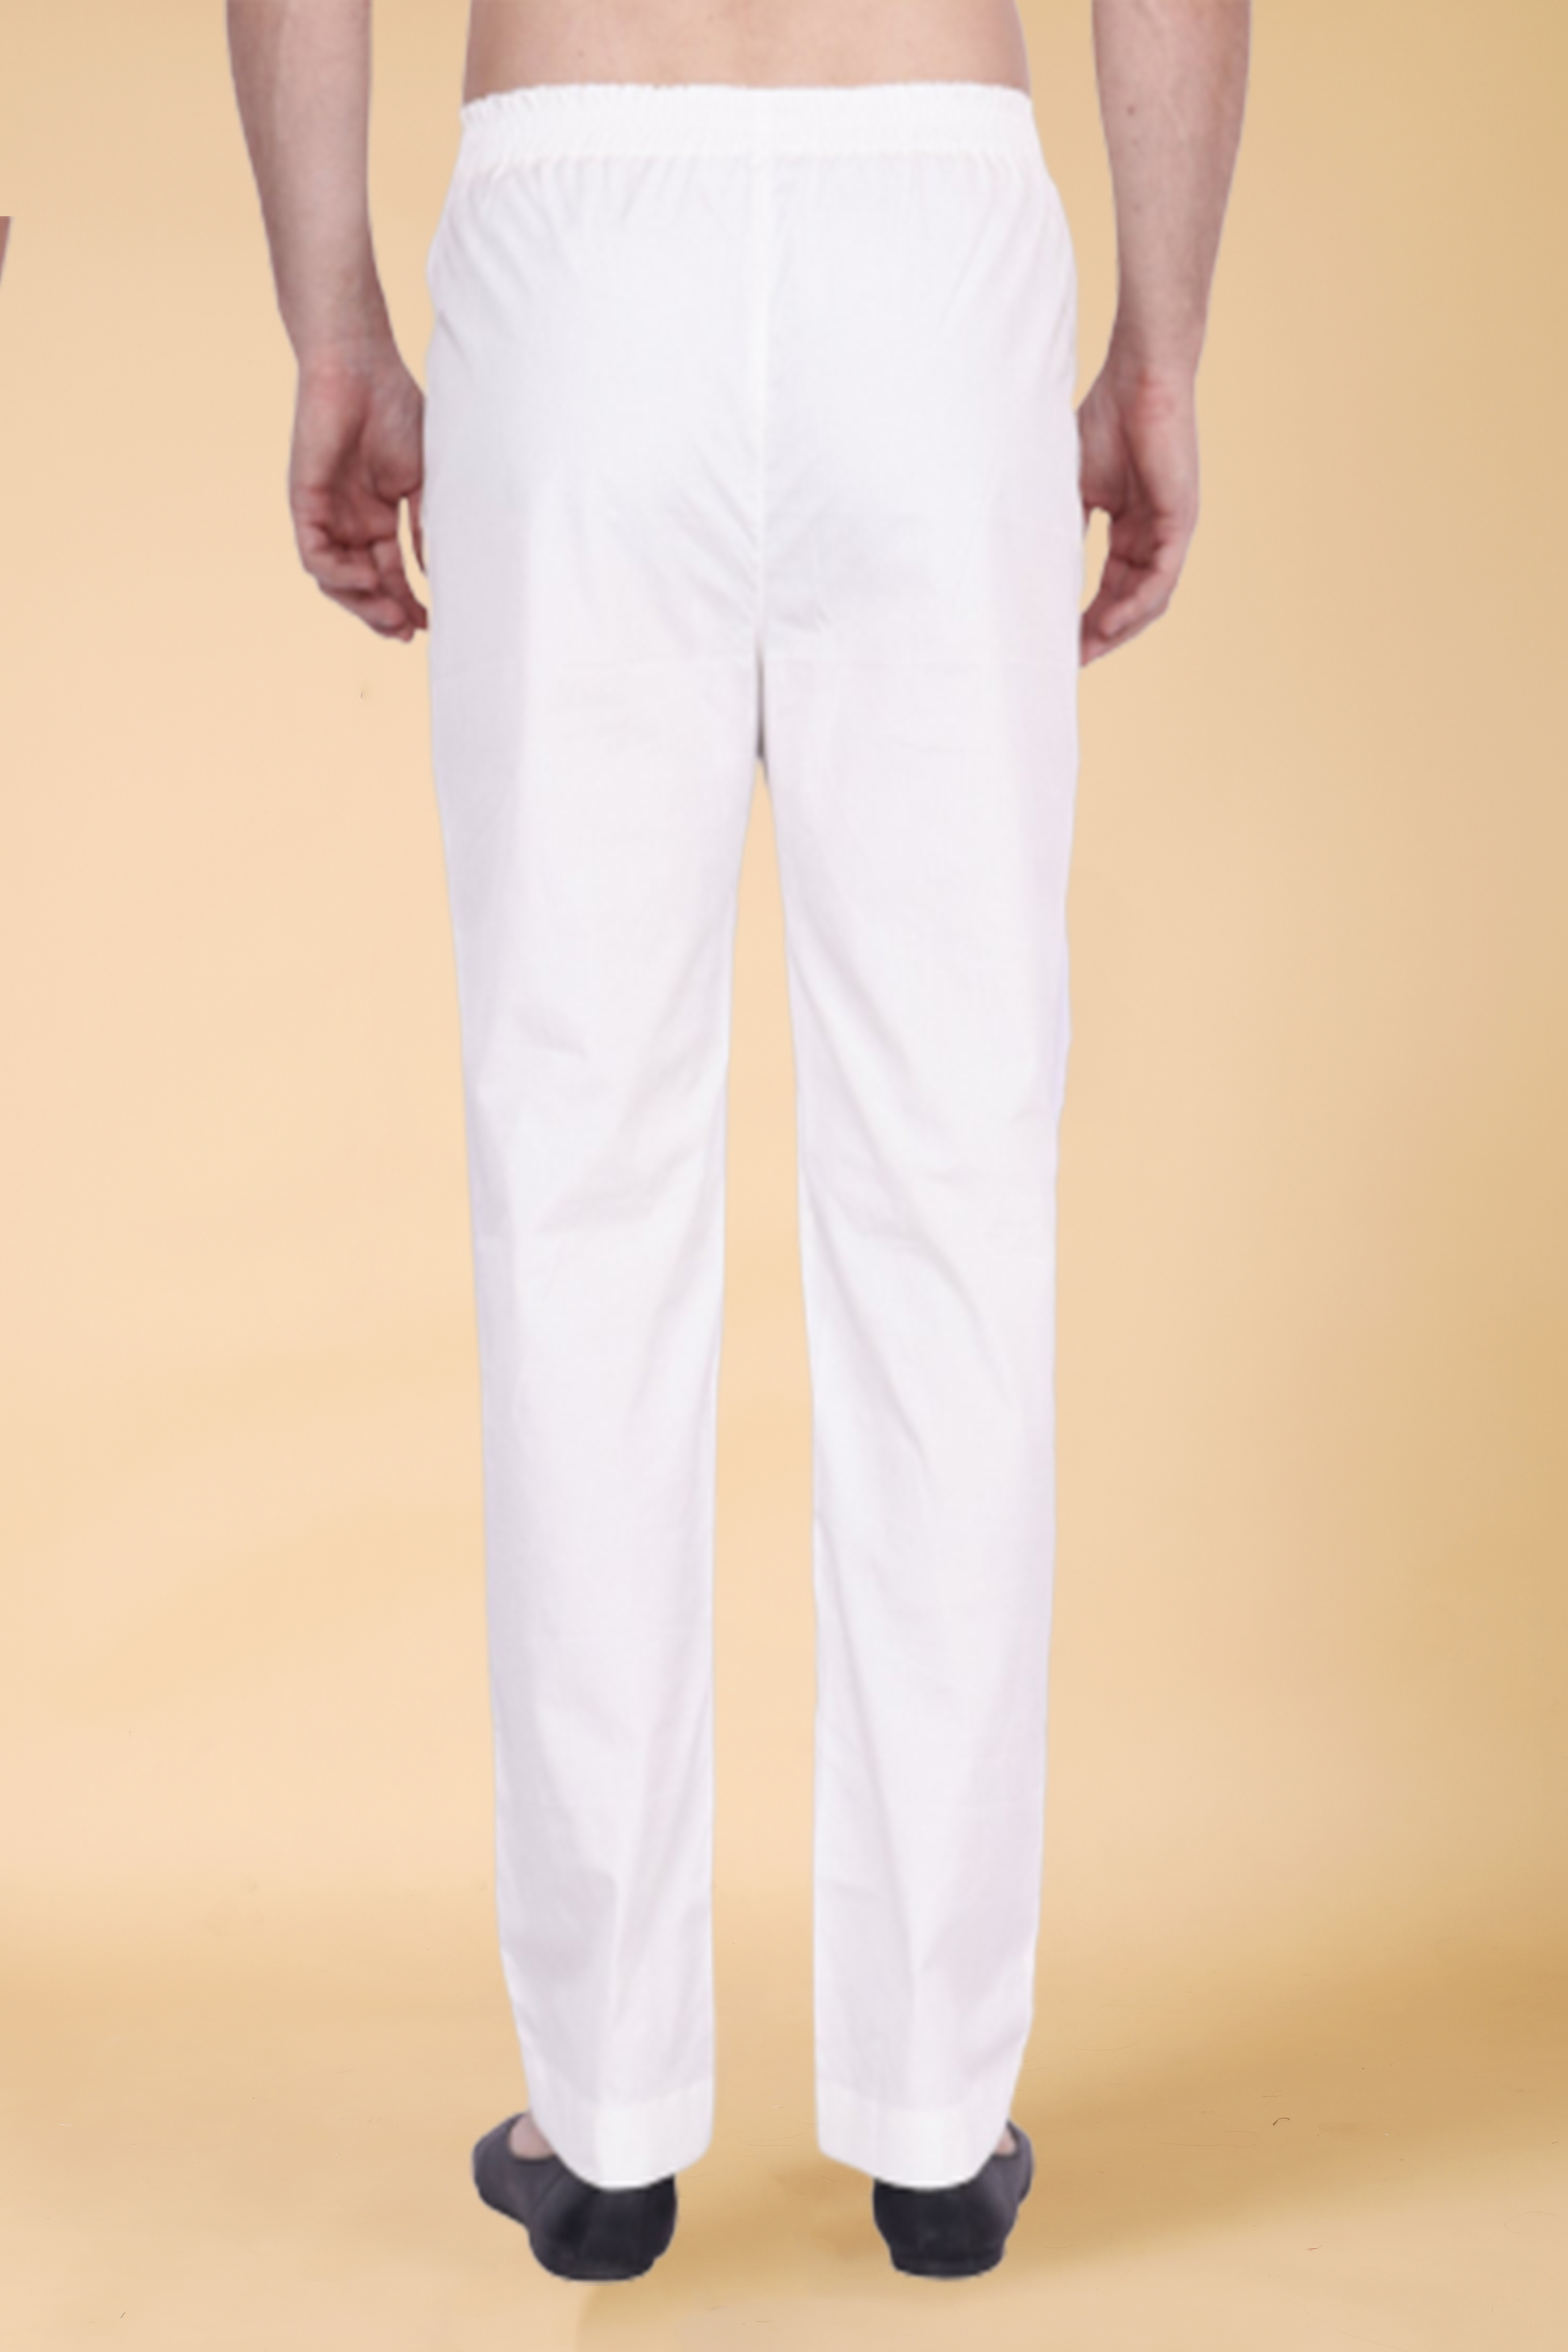 Buy The Cotton Company Mens White Dot Print 100 Cotton Pajama Lounge Pants  Medium Online at Best Prices in India  JioMart